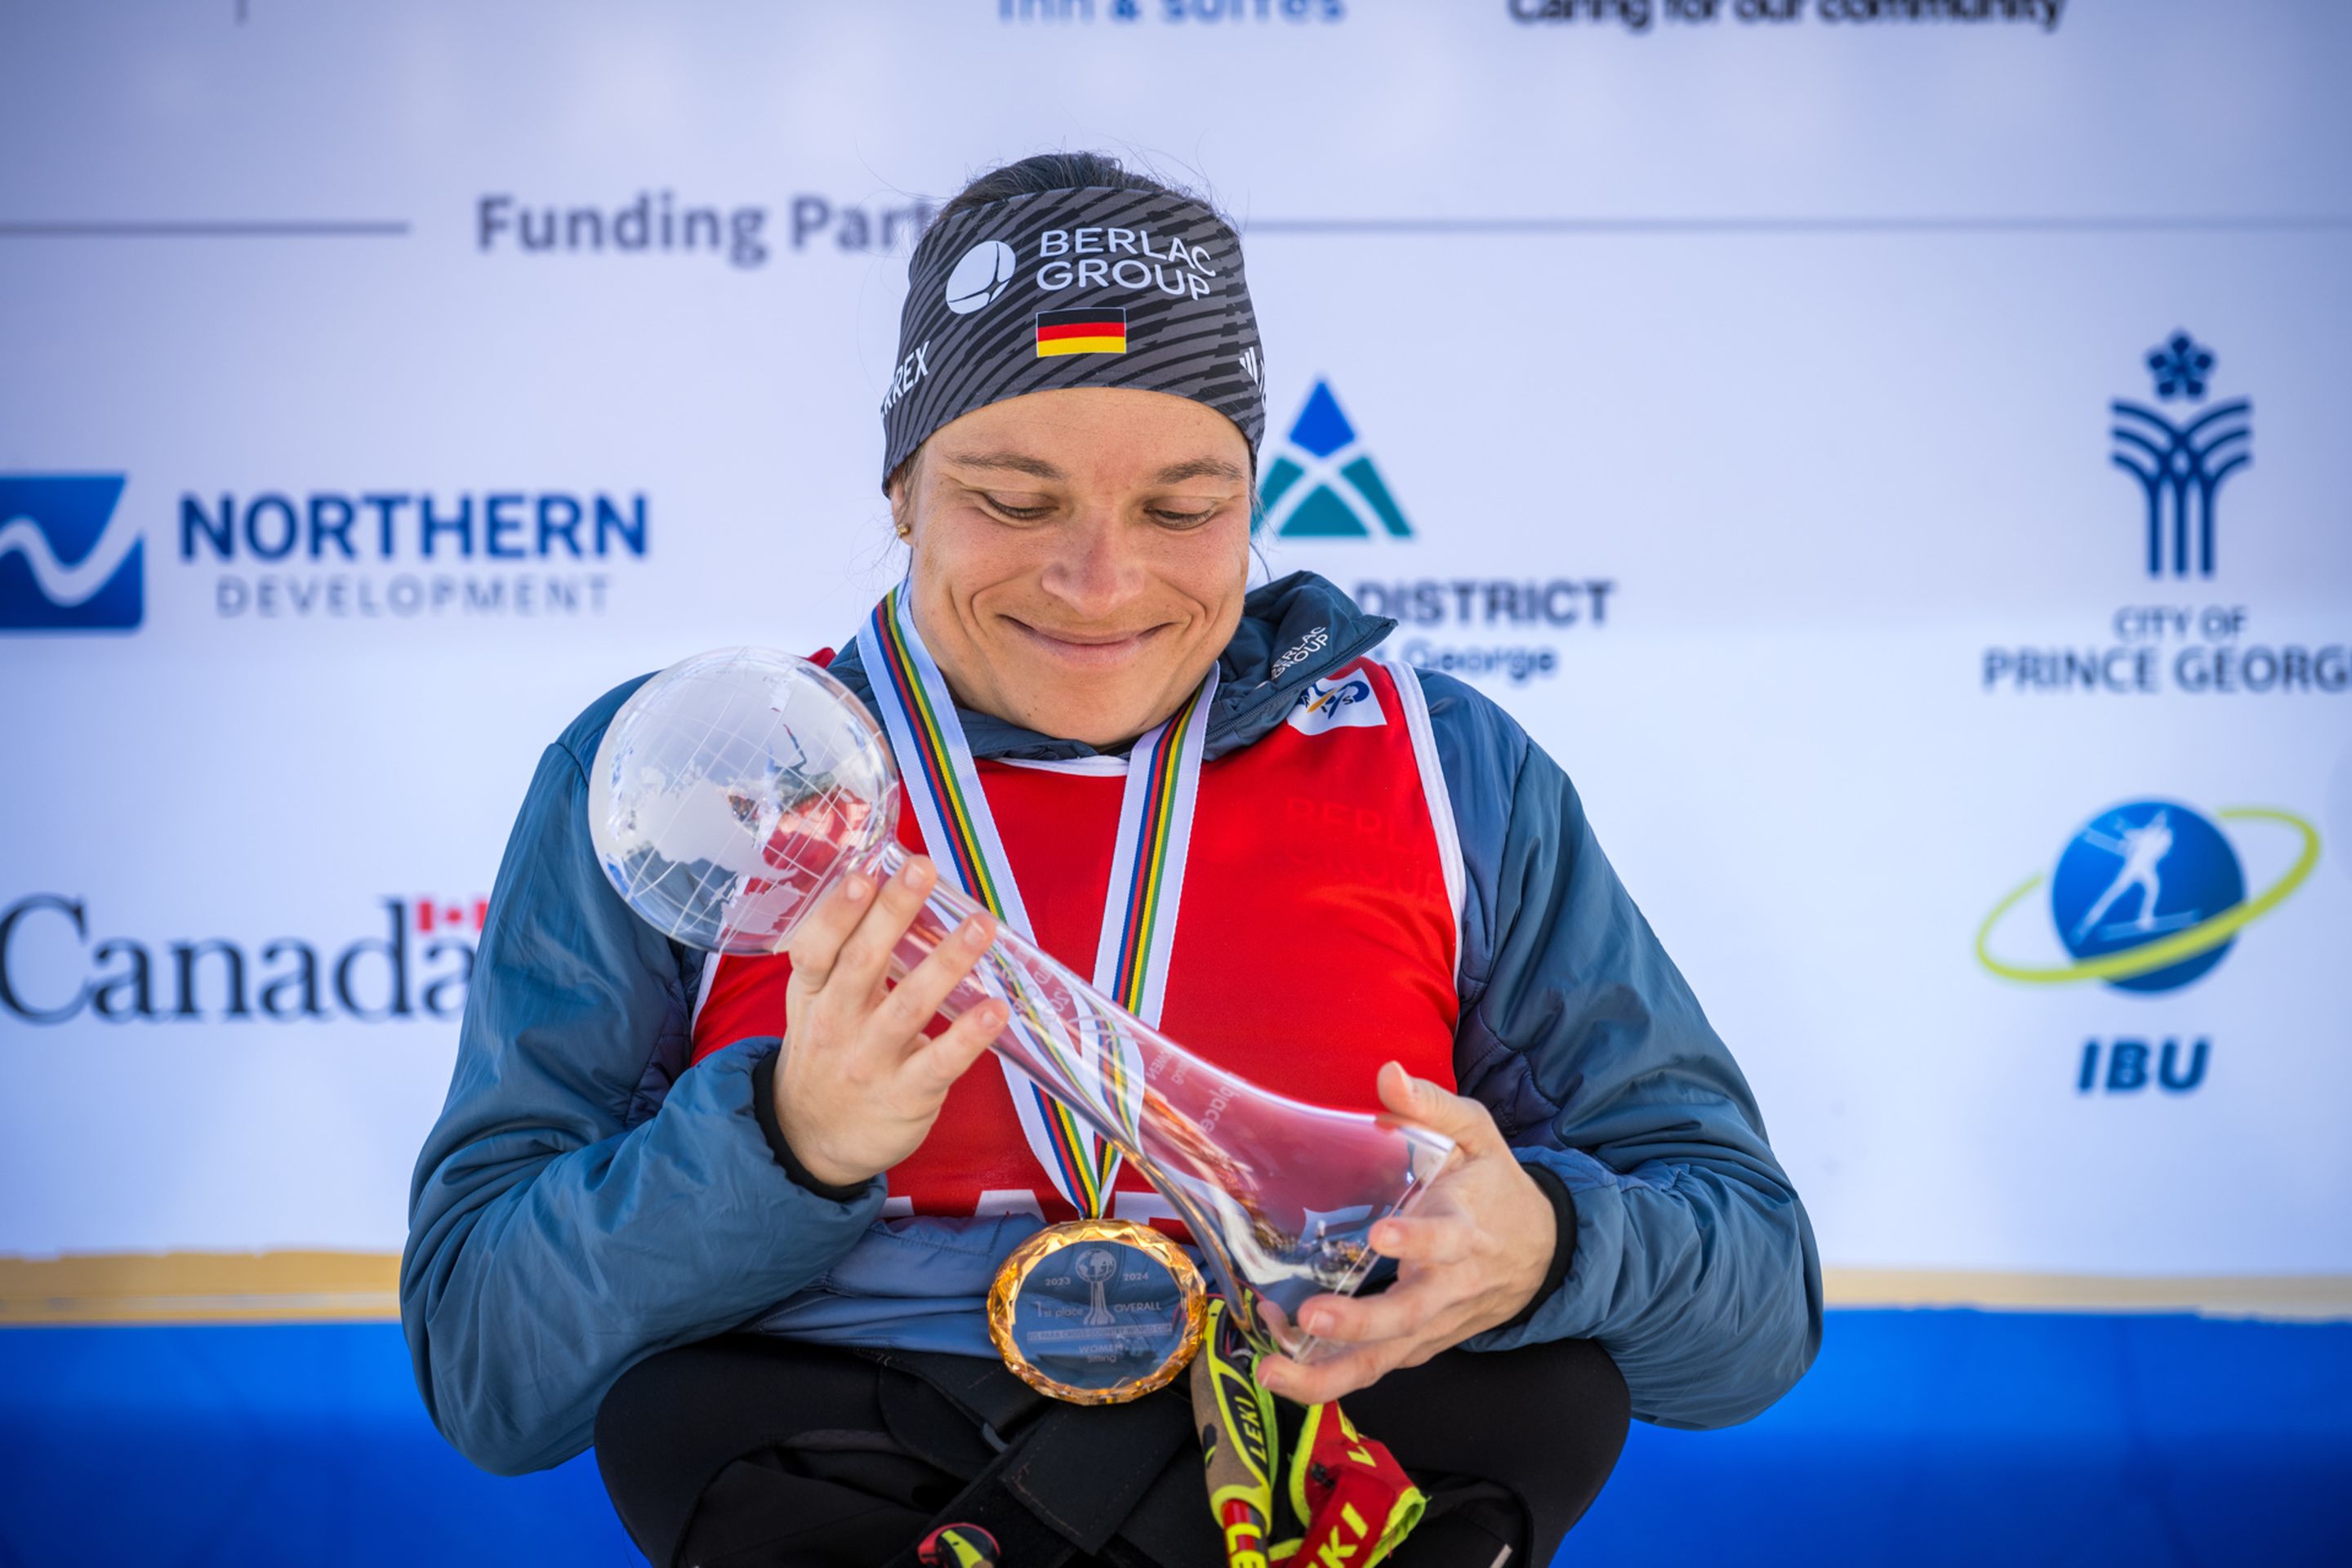 Anja Wicker (GER) holding her overall crystal globe